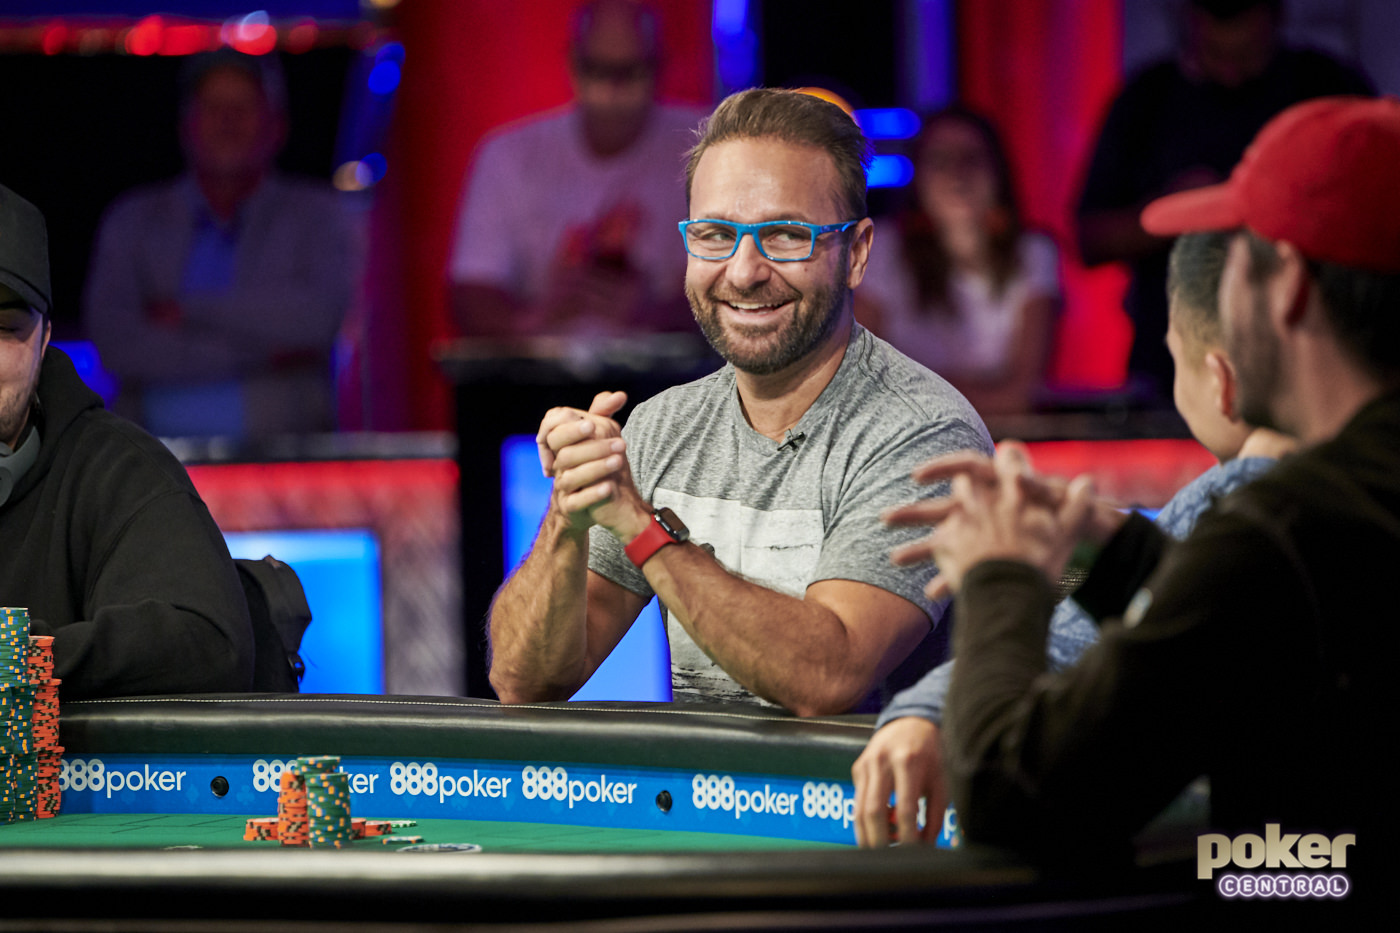 Daniel Negreanu is smiling and looking on his co-poker player while showing his hands crossed